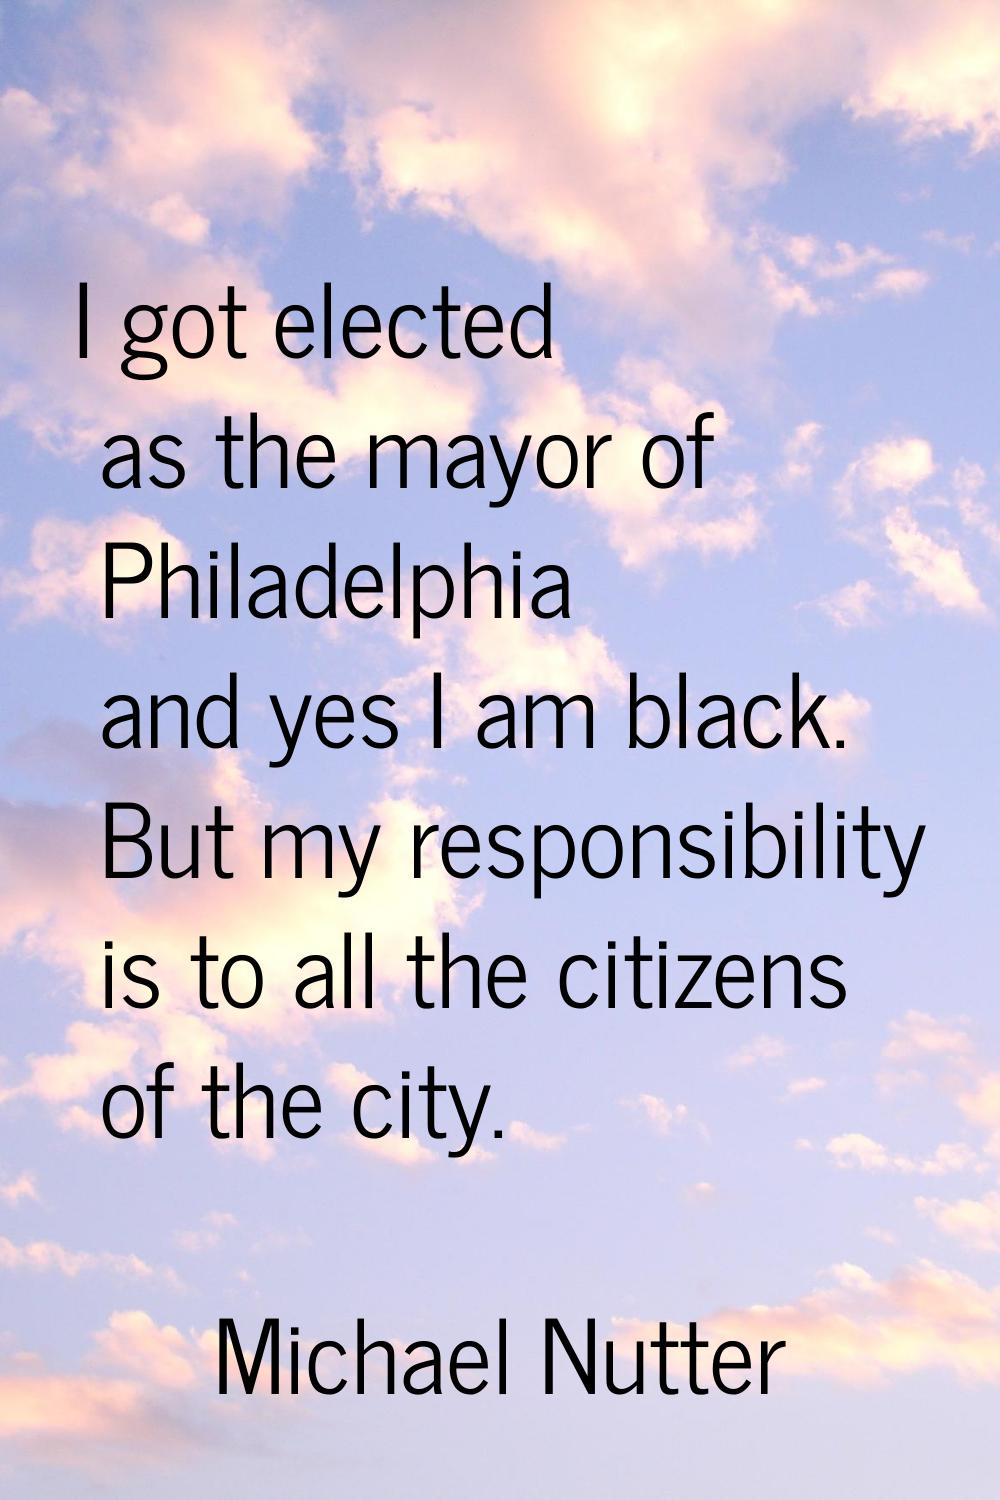 I got elected as the mayor of Philadelphia and yes I am black. But my responsibility is to all the 